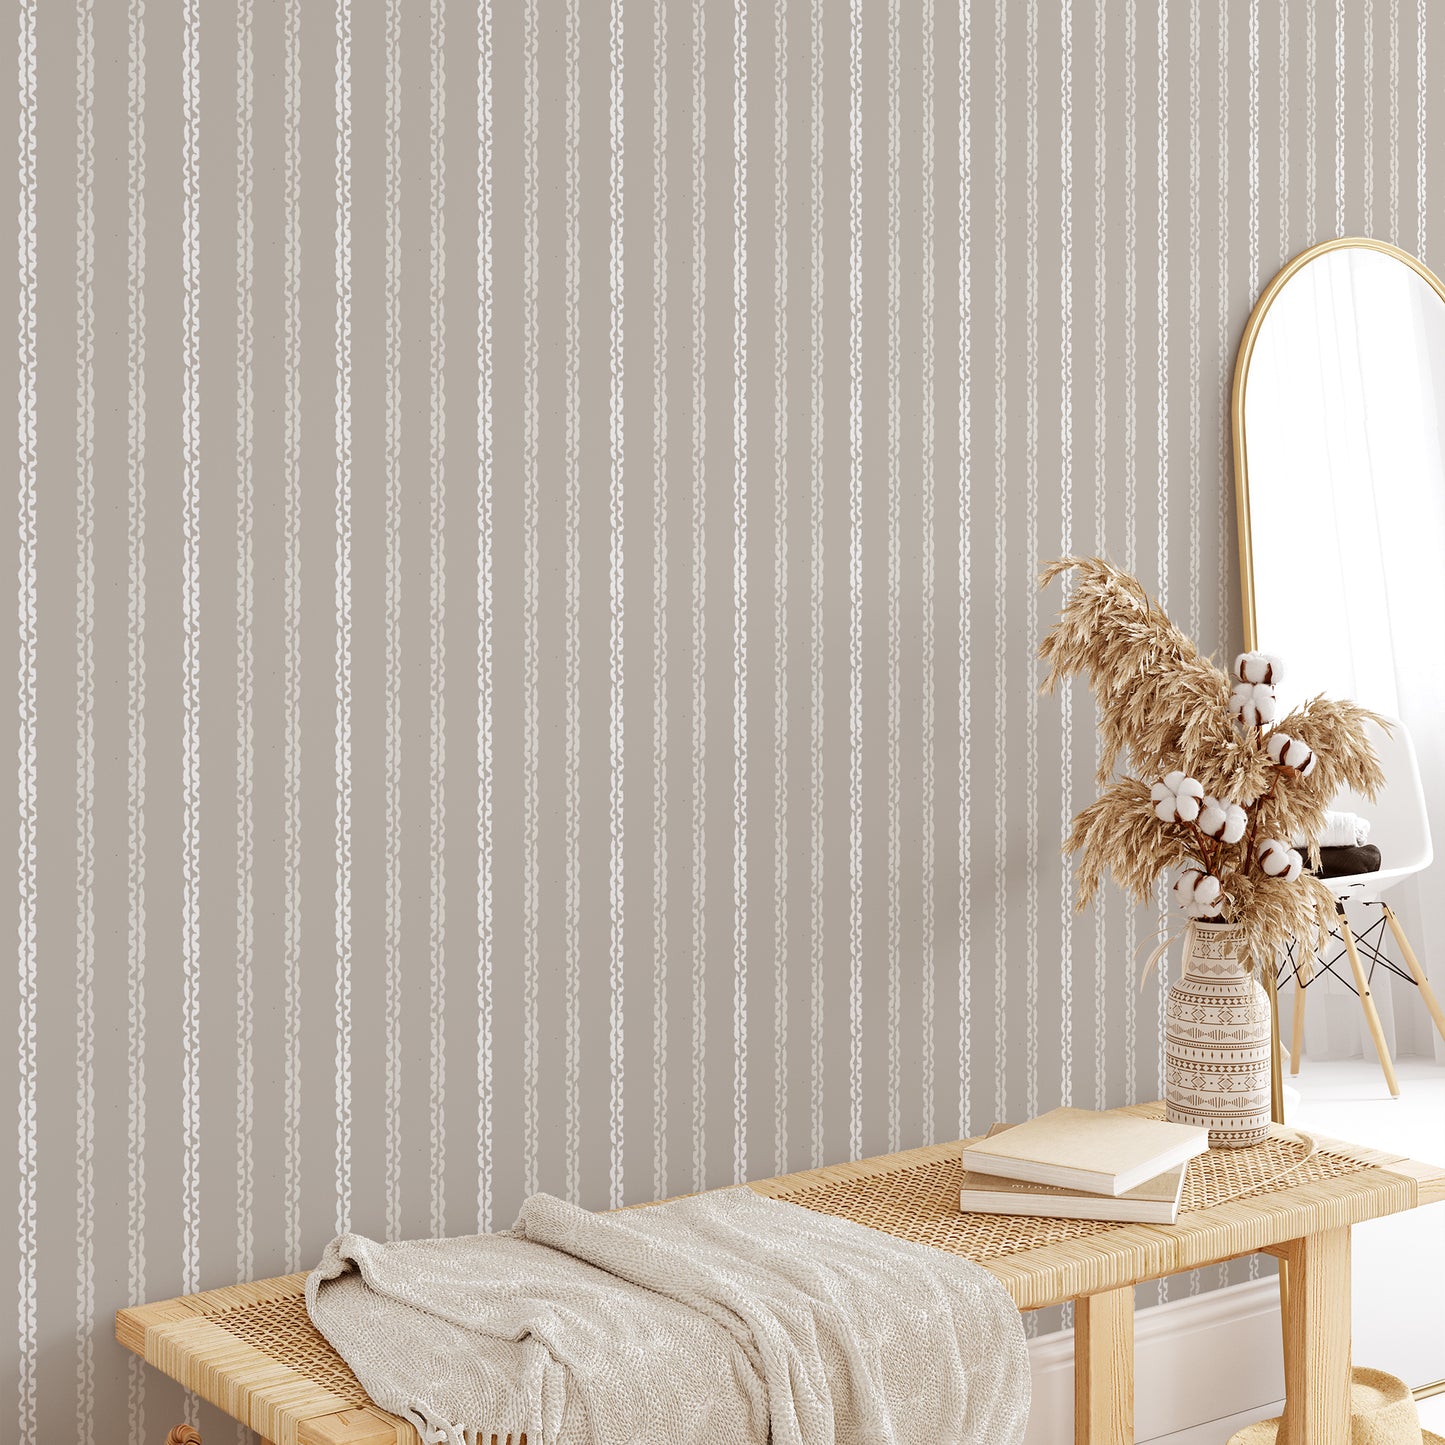 Bedroom wall featuring Clea peel-and-stick wallpaper in clay by Jackie O'Bosky. Taupe and cream vertical stripes.